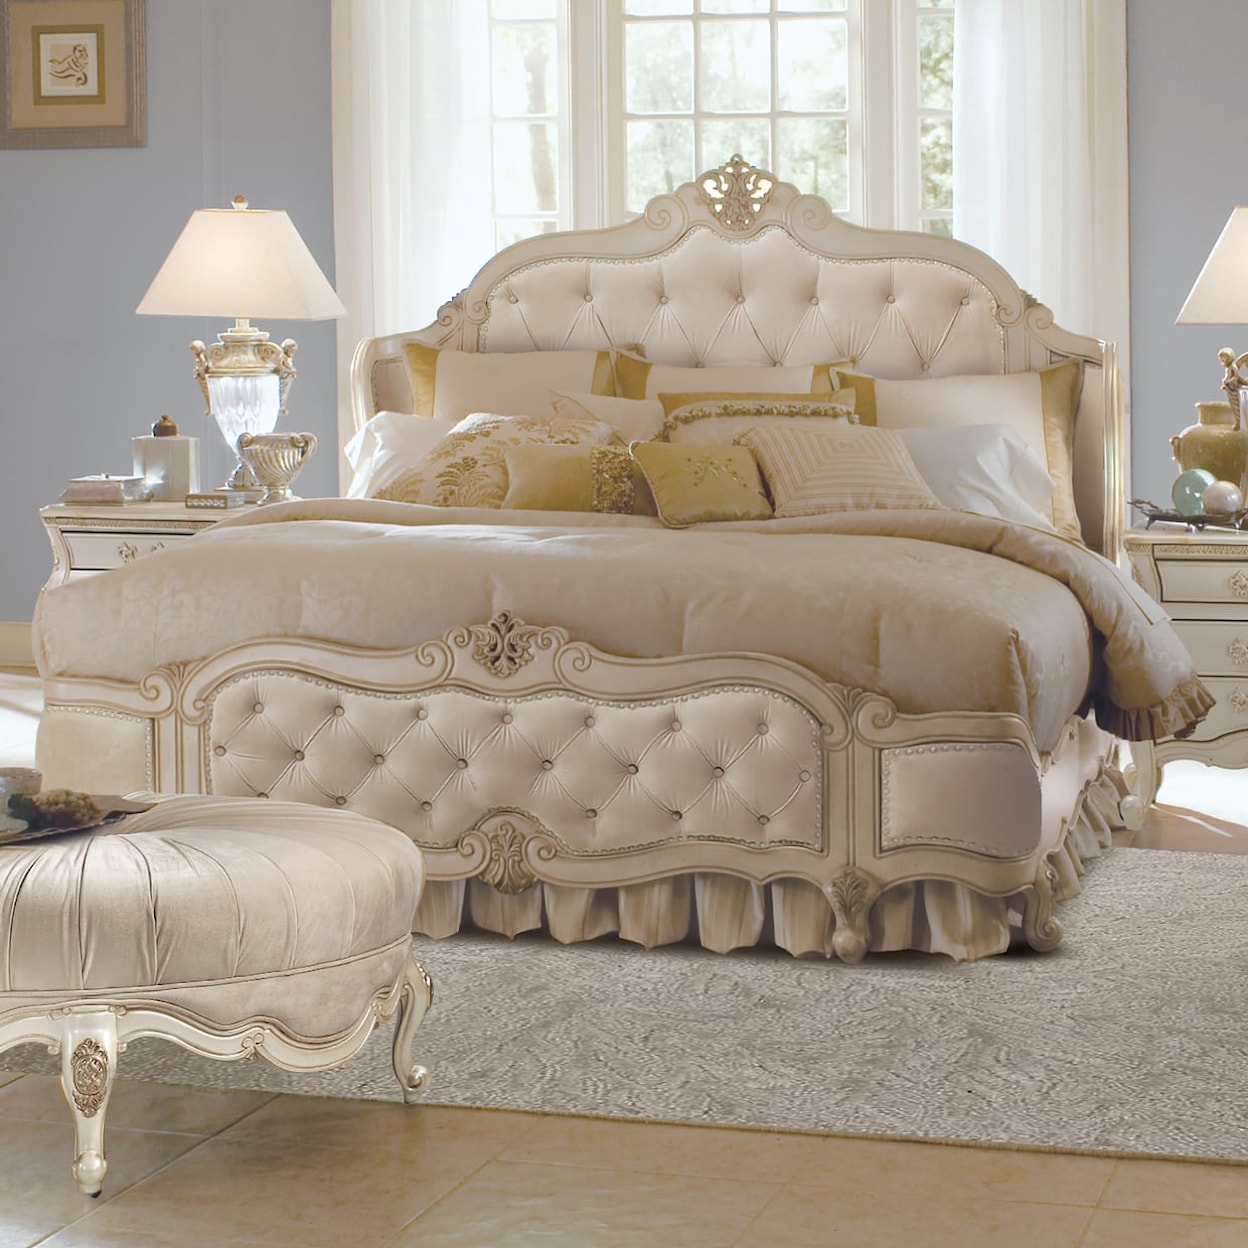 Michael Amini Lavelle Classic Pearl Upholstered California King Mansion Bed